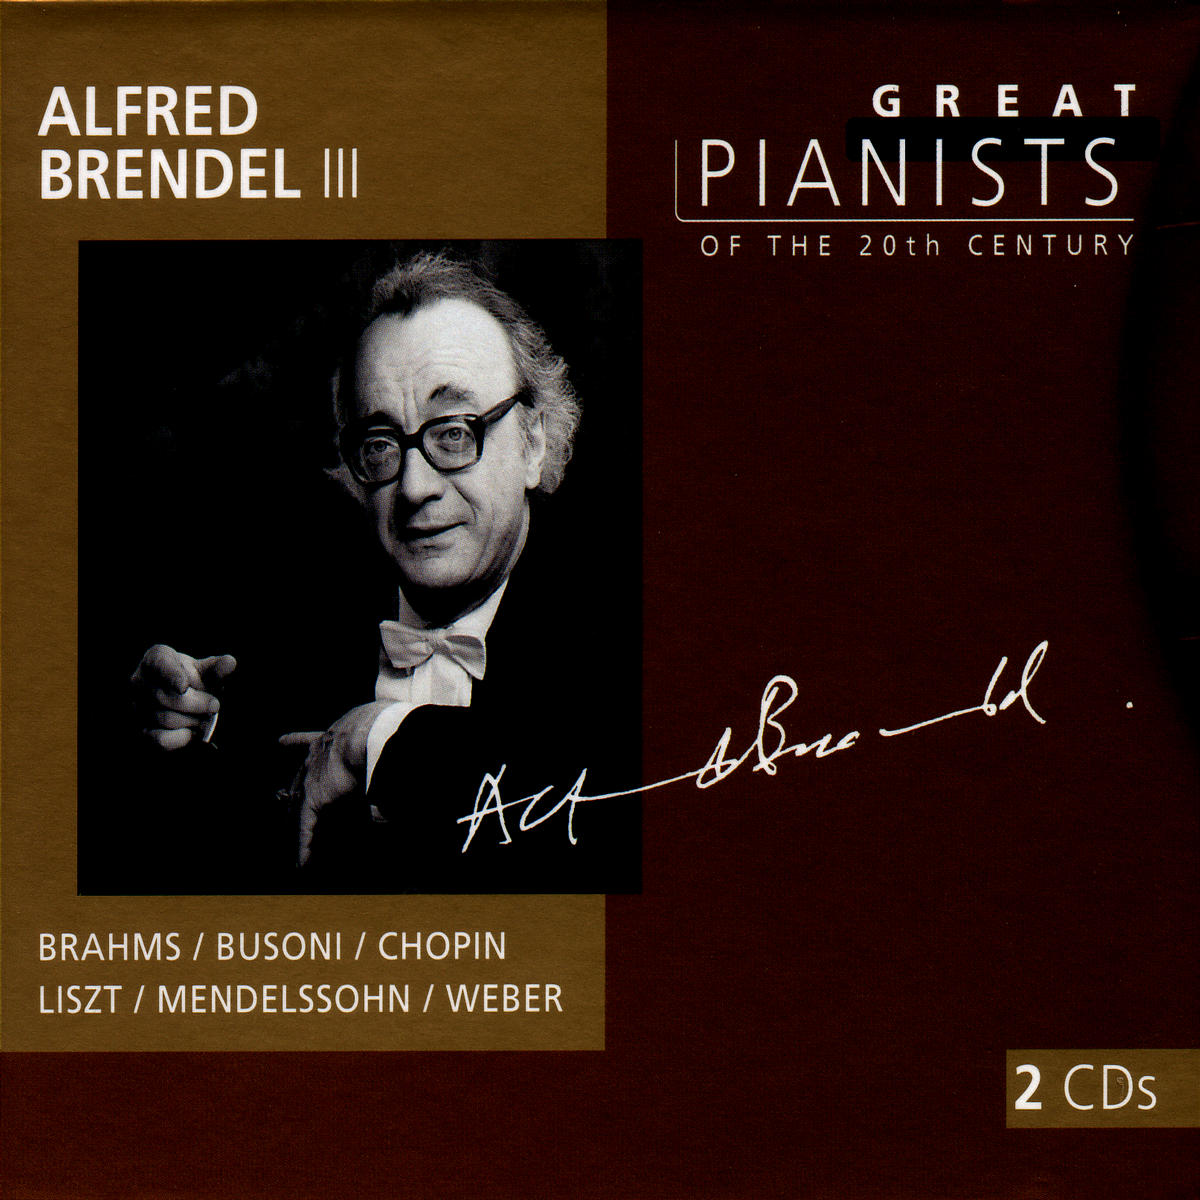 Product Family | Alfred Brendel III (Great Pianists)